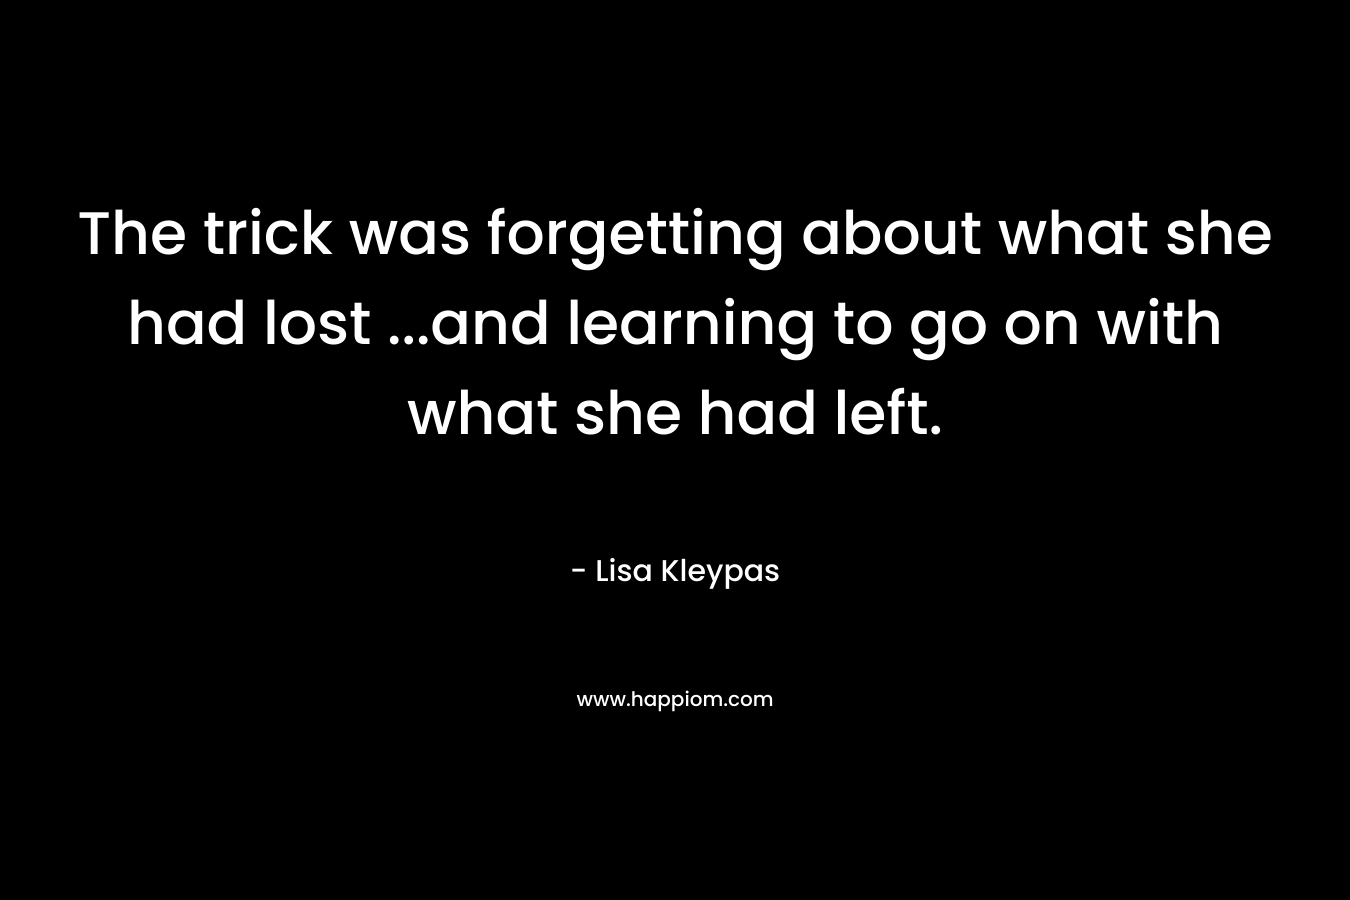 The trick was forgetting about what she had lost …and learning to go on with what she had left. – Lisa Kleypas